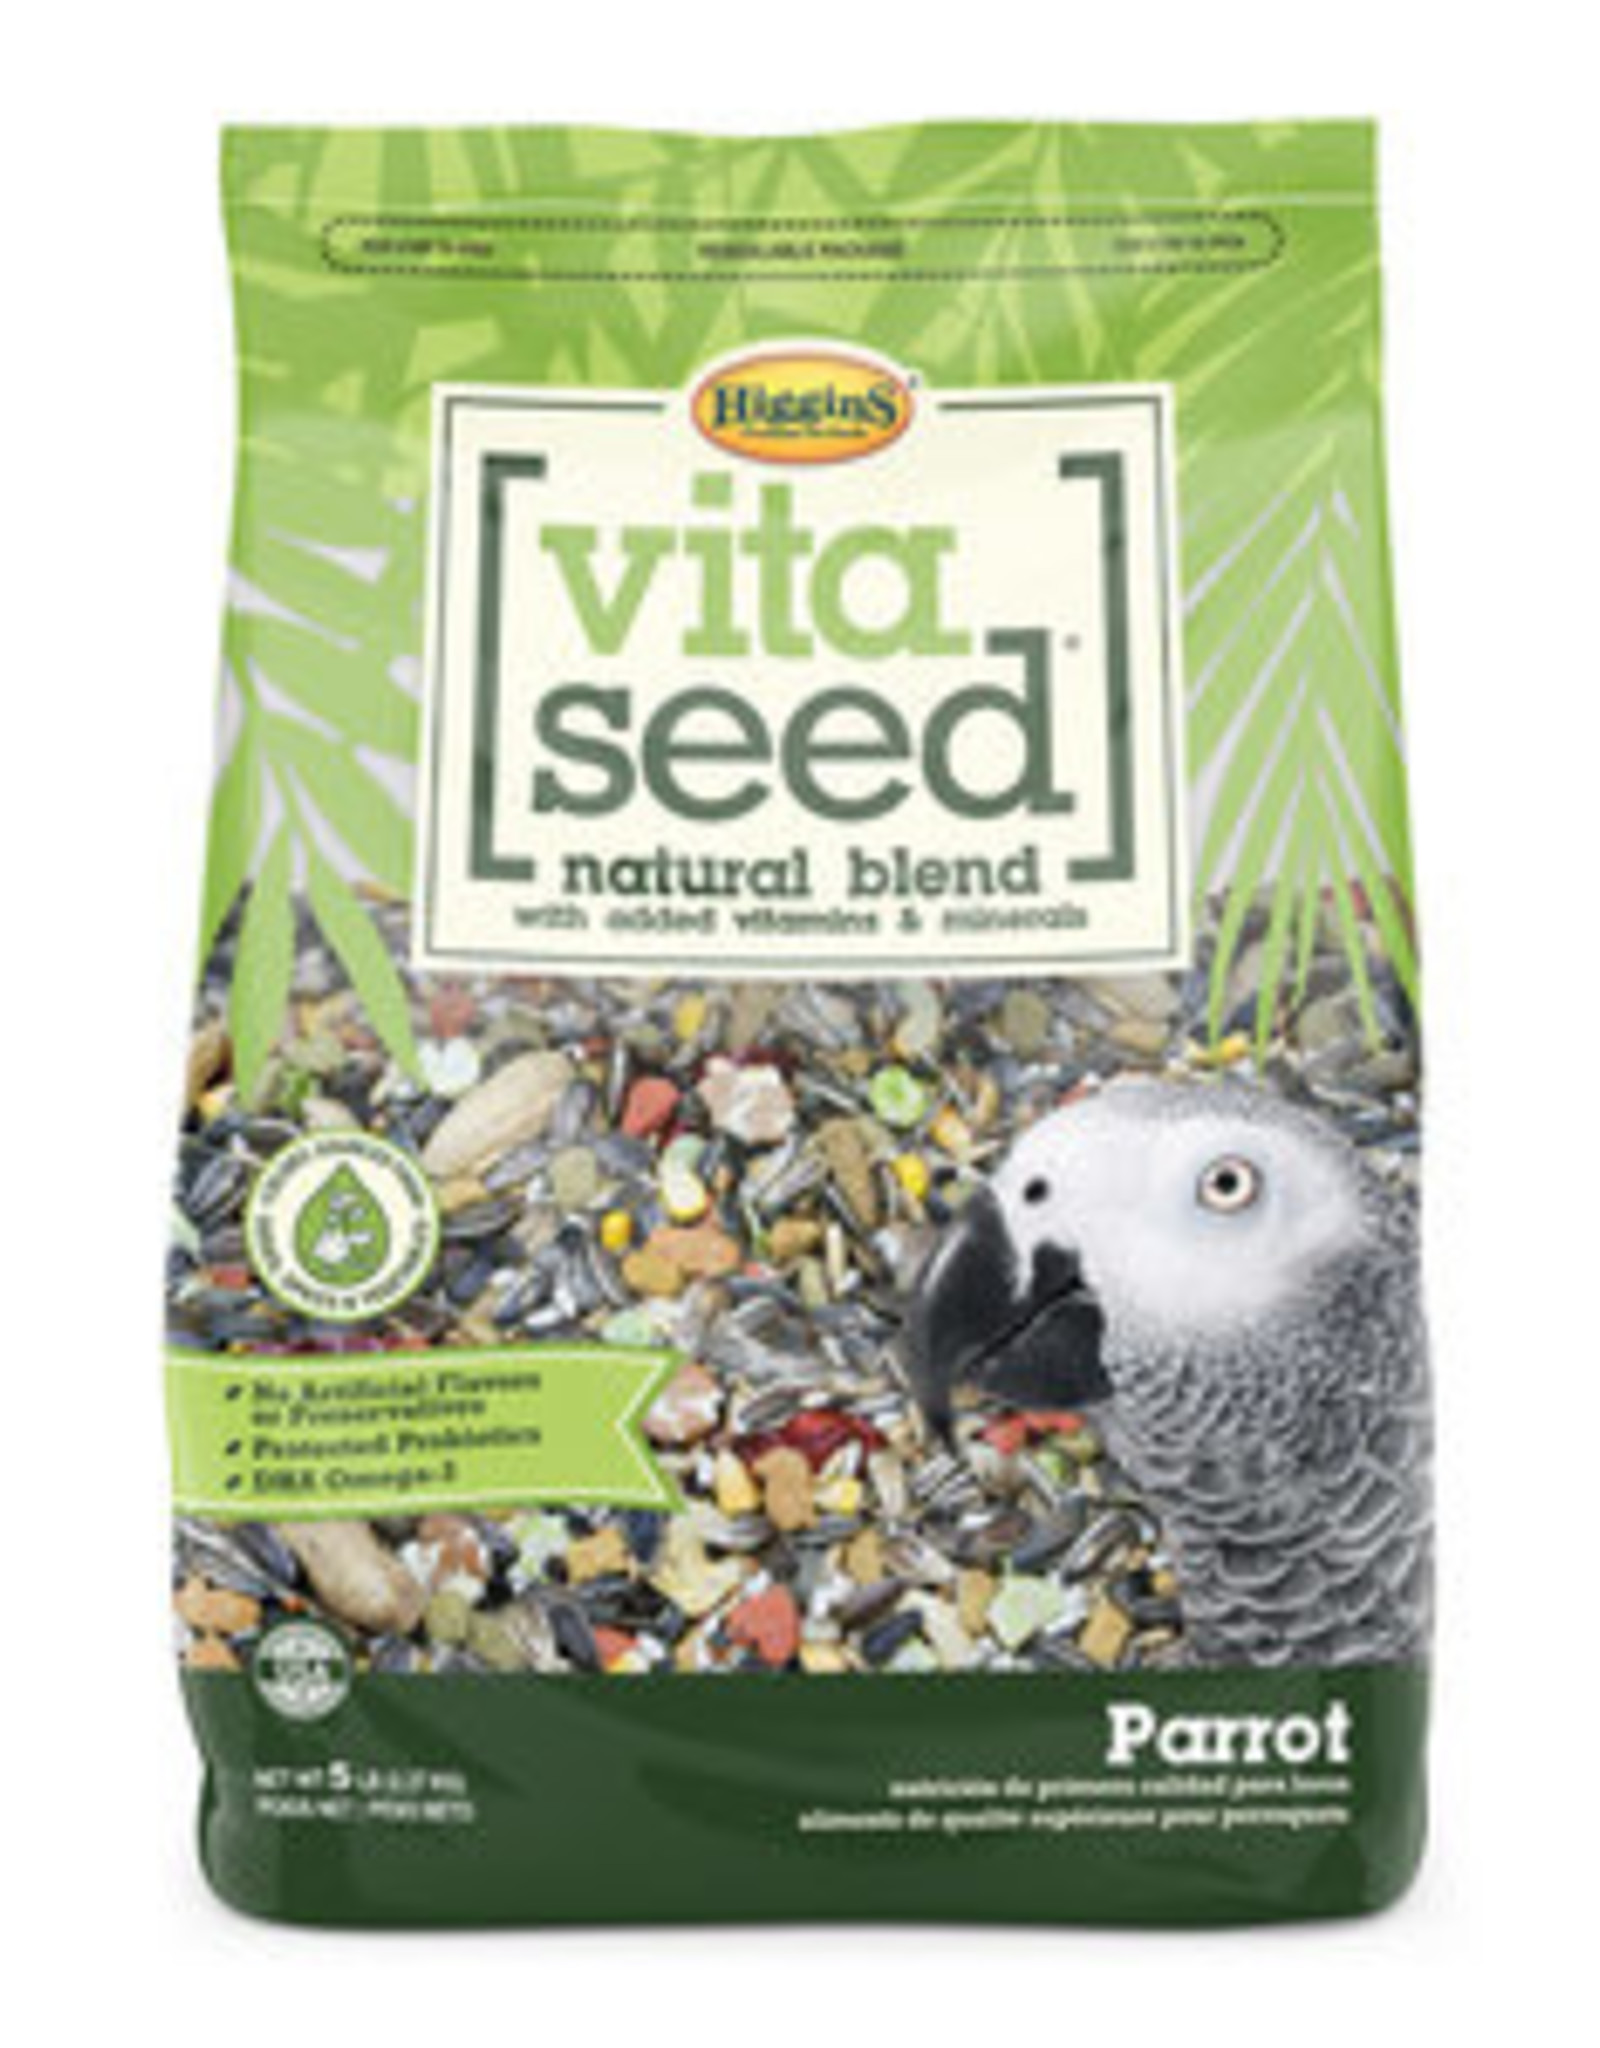 THE HIGGINS GROUP CORP. HIGGINS VITA SEED PARROT 5LBS